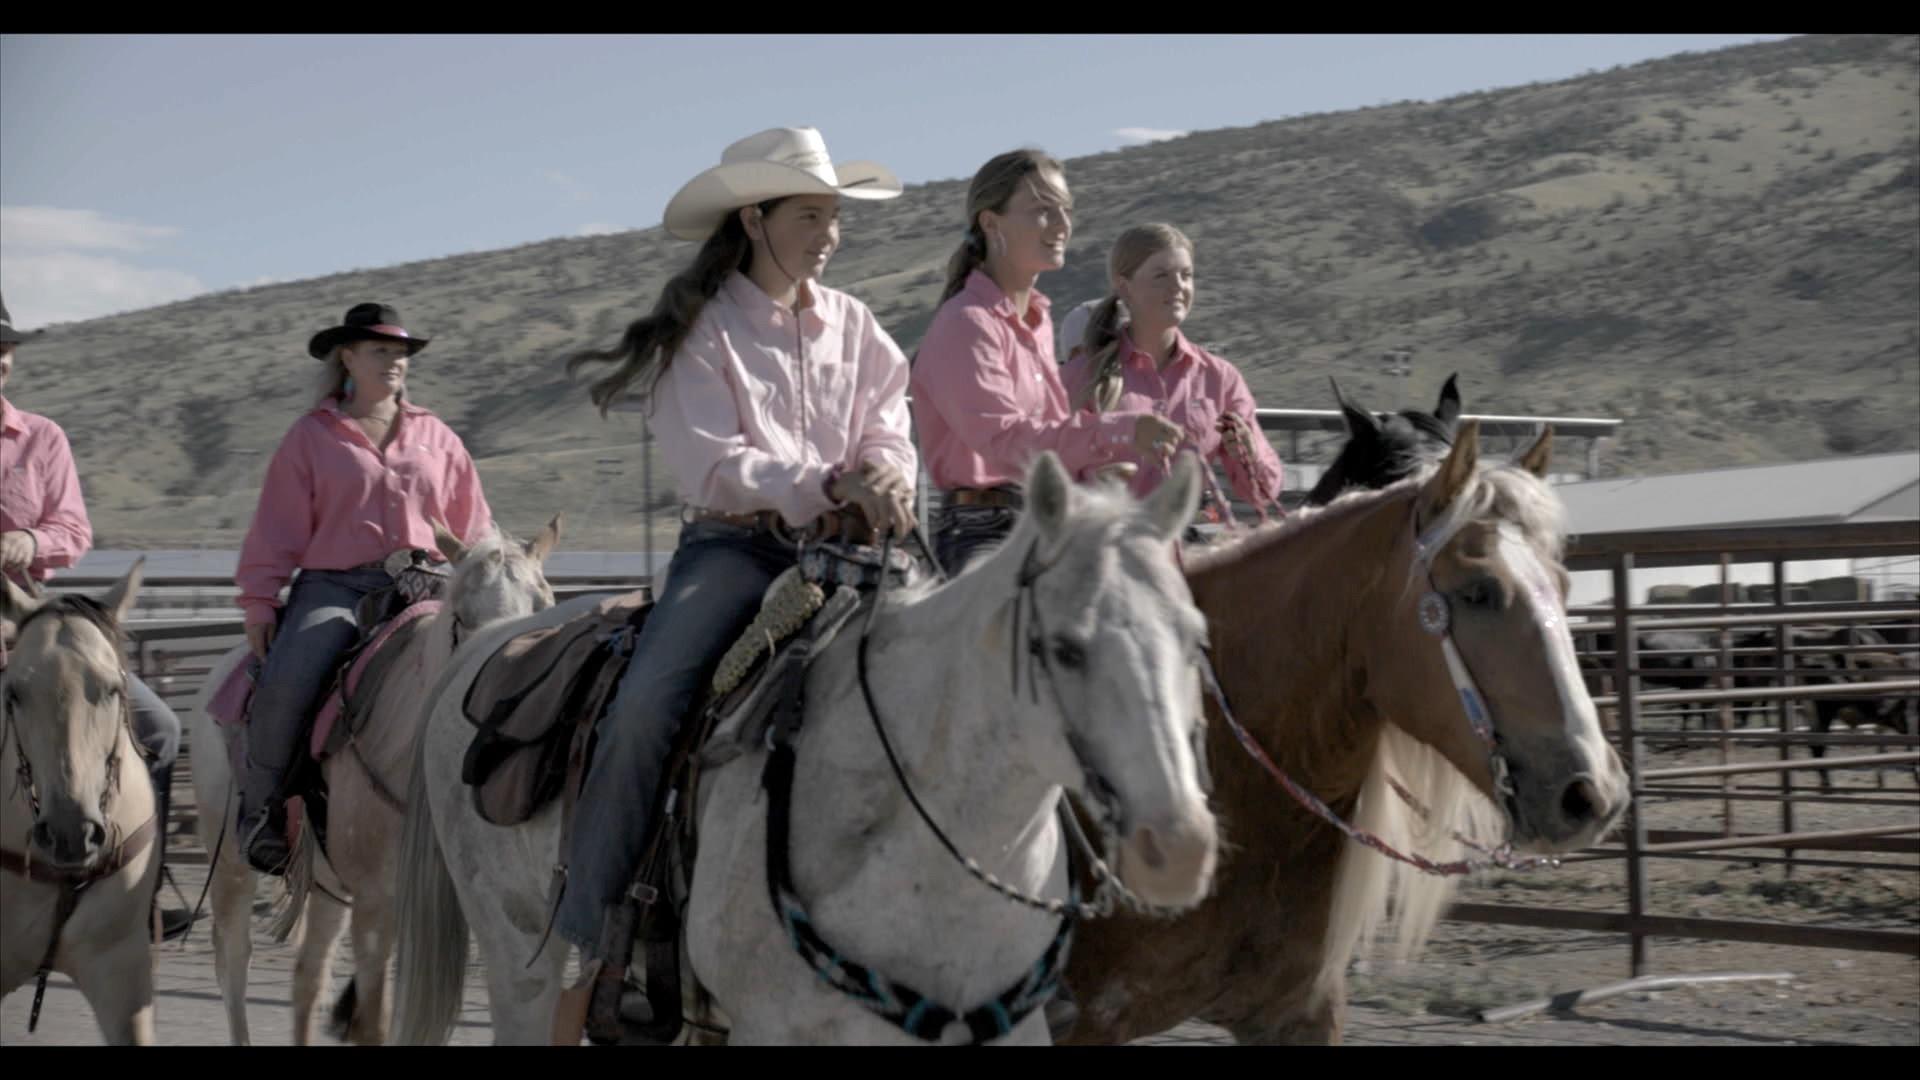 Riders prepare for a rodeo in Cody, Wyoming.